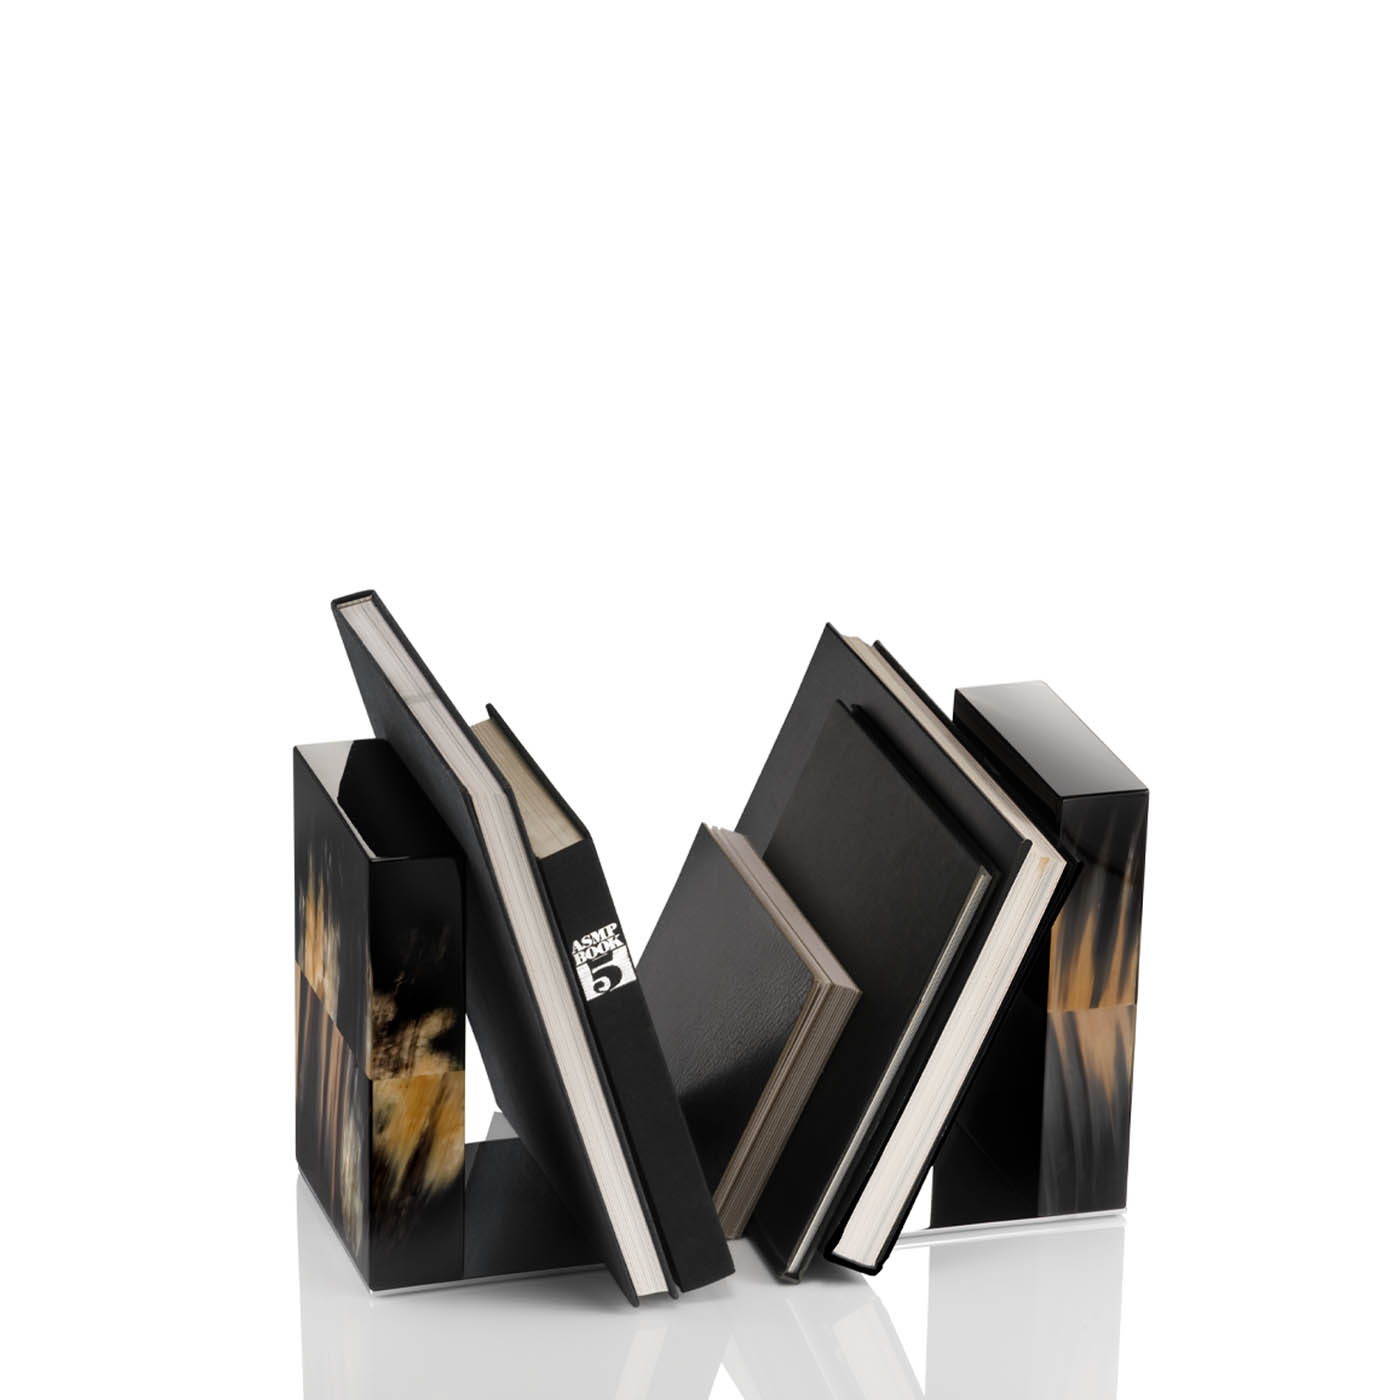 Office sets and smoking accessories - Igor set of bookends in glossy black lacquered wood and horn - Arcahorn